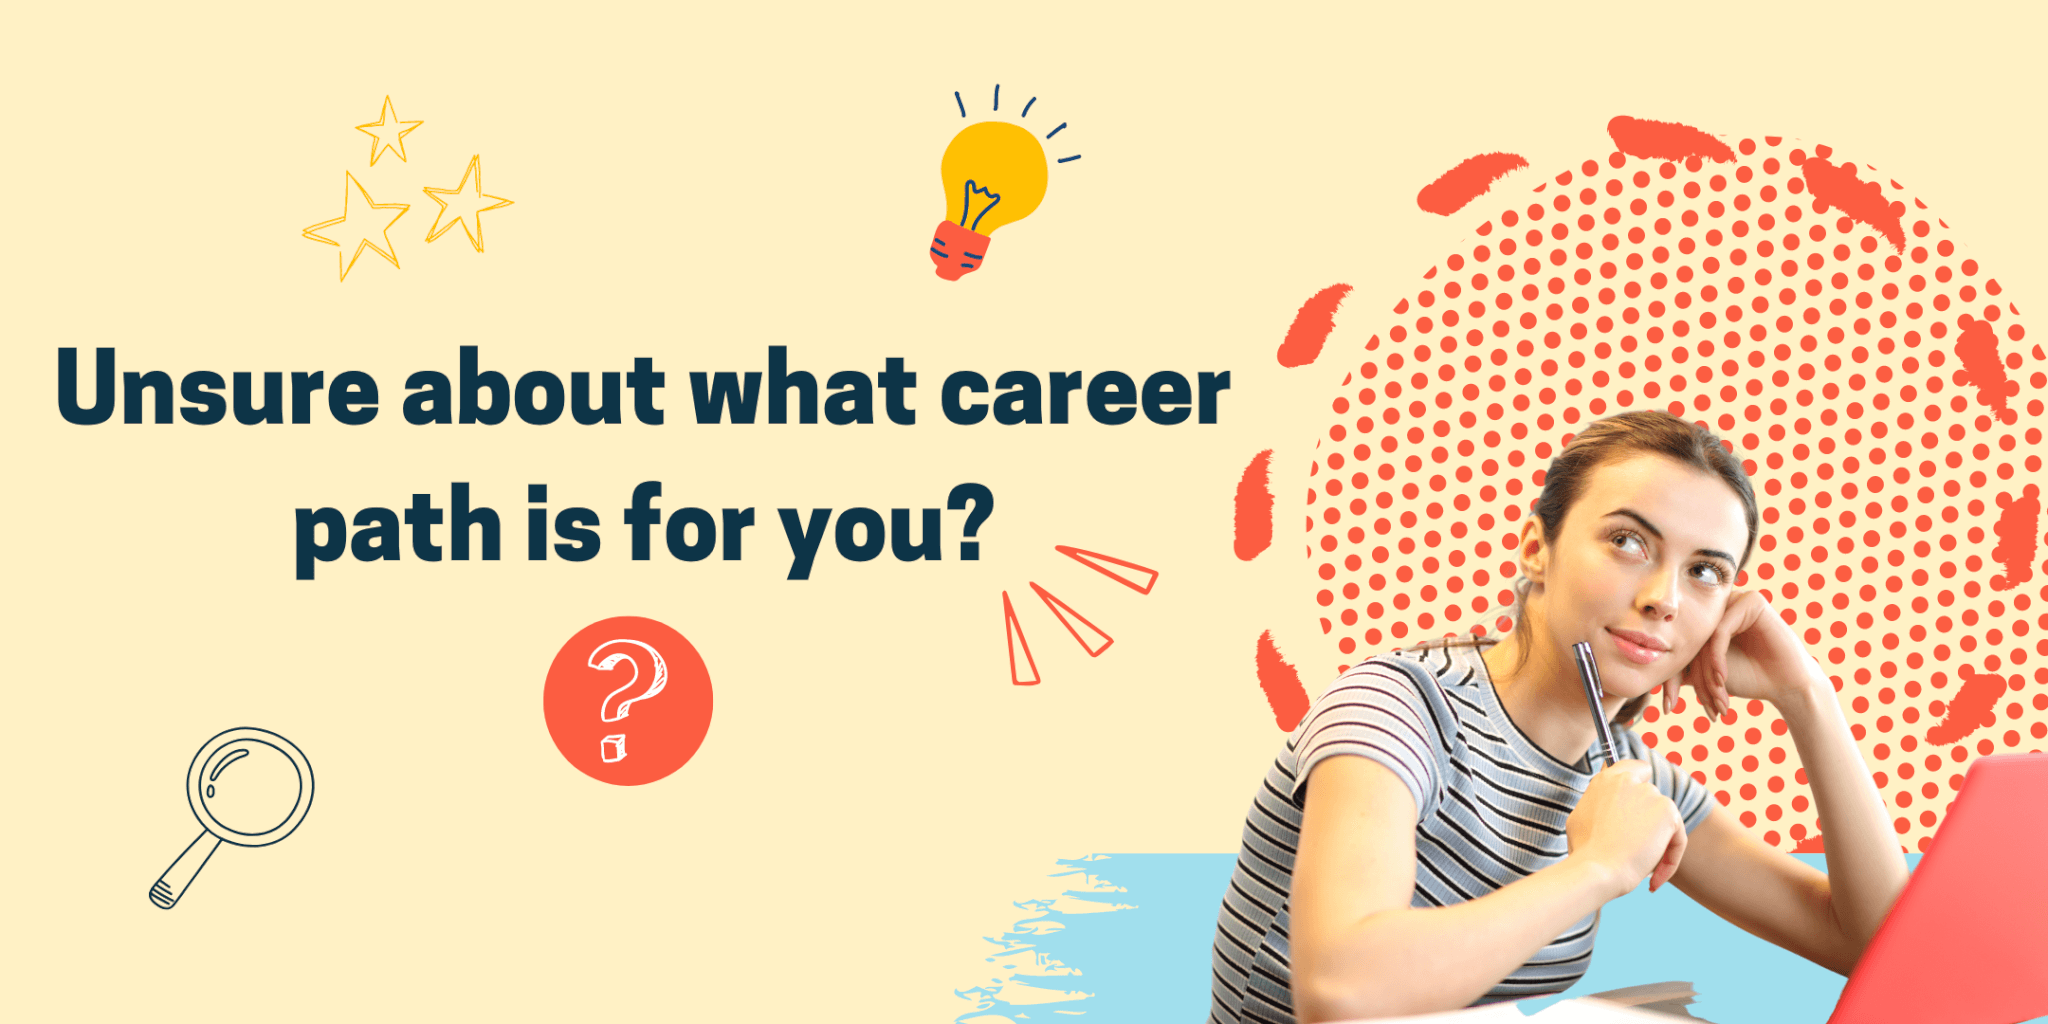 Unsure about what career path is for you?